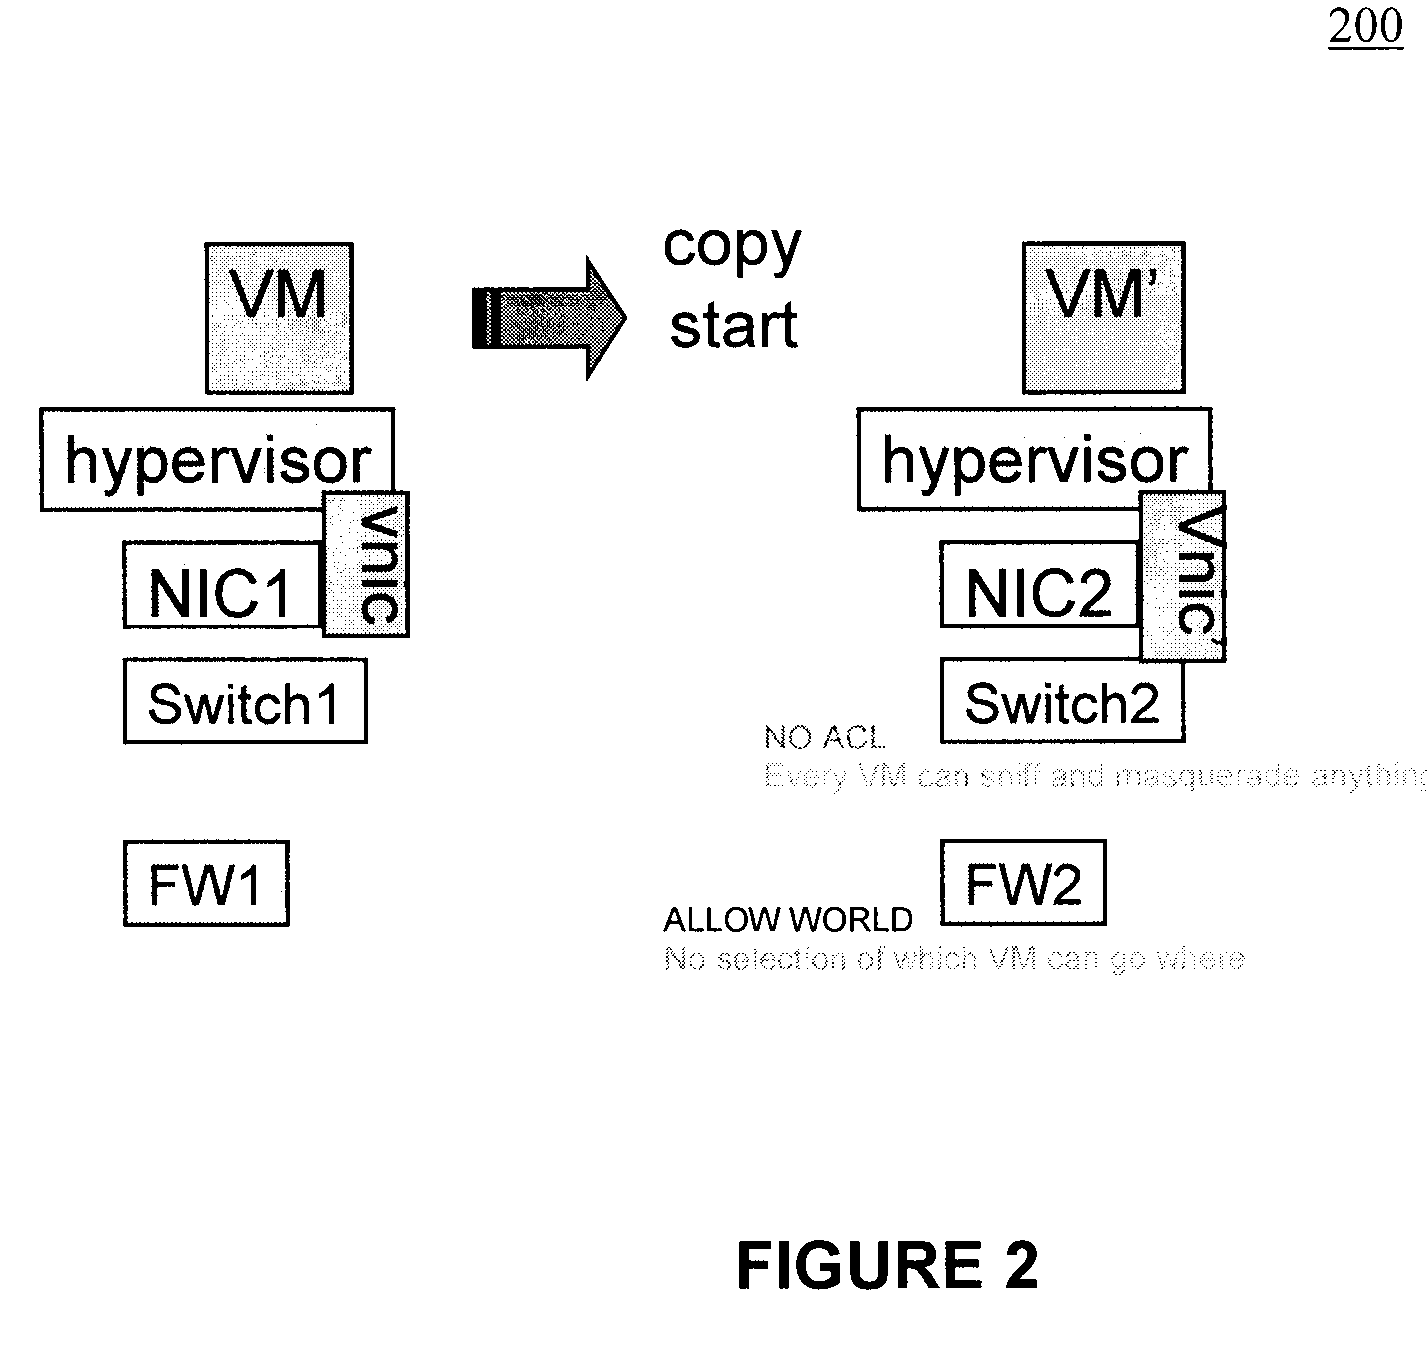 Moveable access control list (ACL) mechanisms for hypervisors and virtual machines and virtual port firewalls